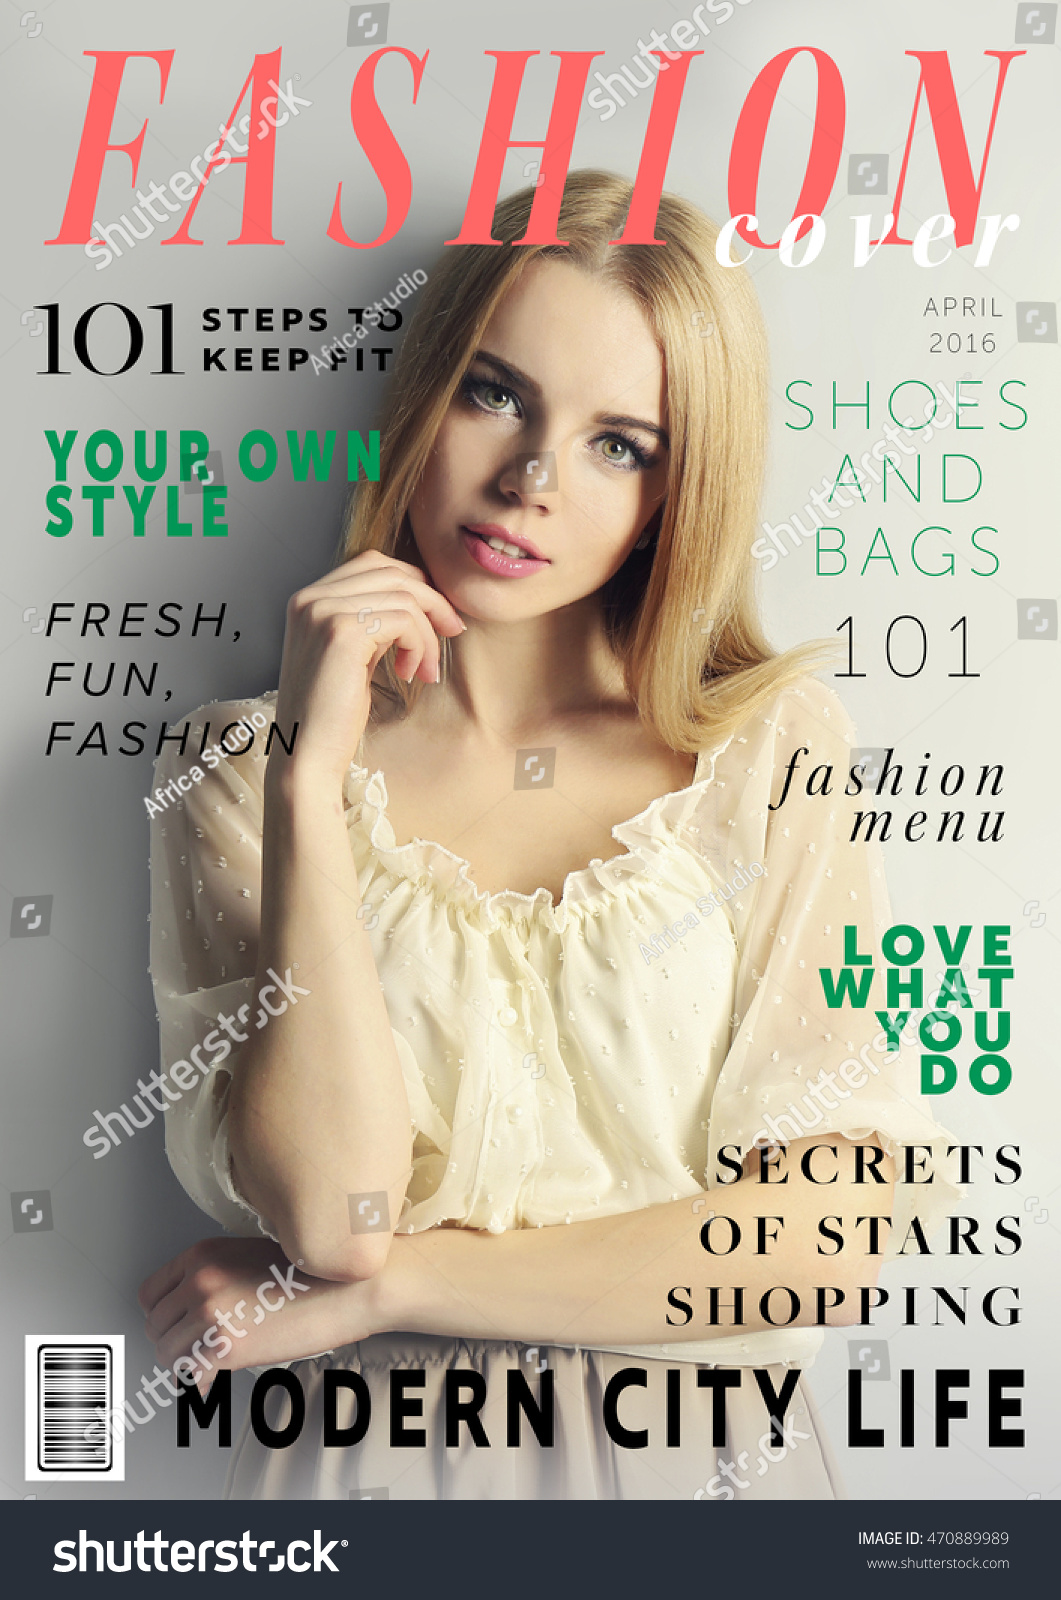 Attractive young woman on fashion magazine cover. Fashionable lifestyle concept. #470889989